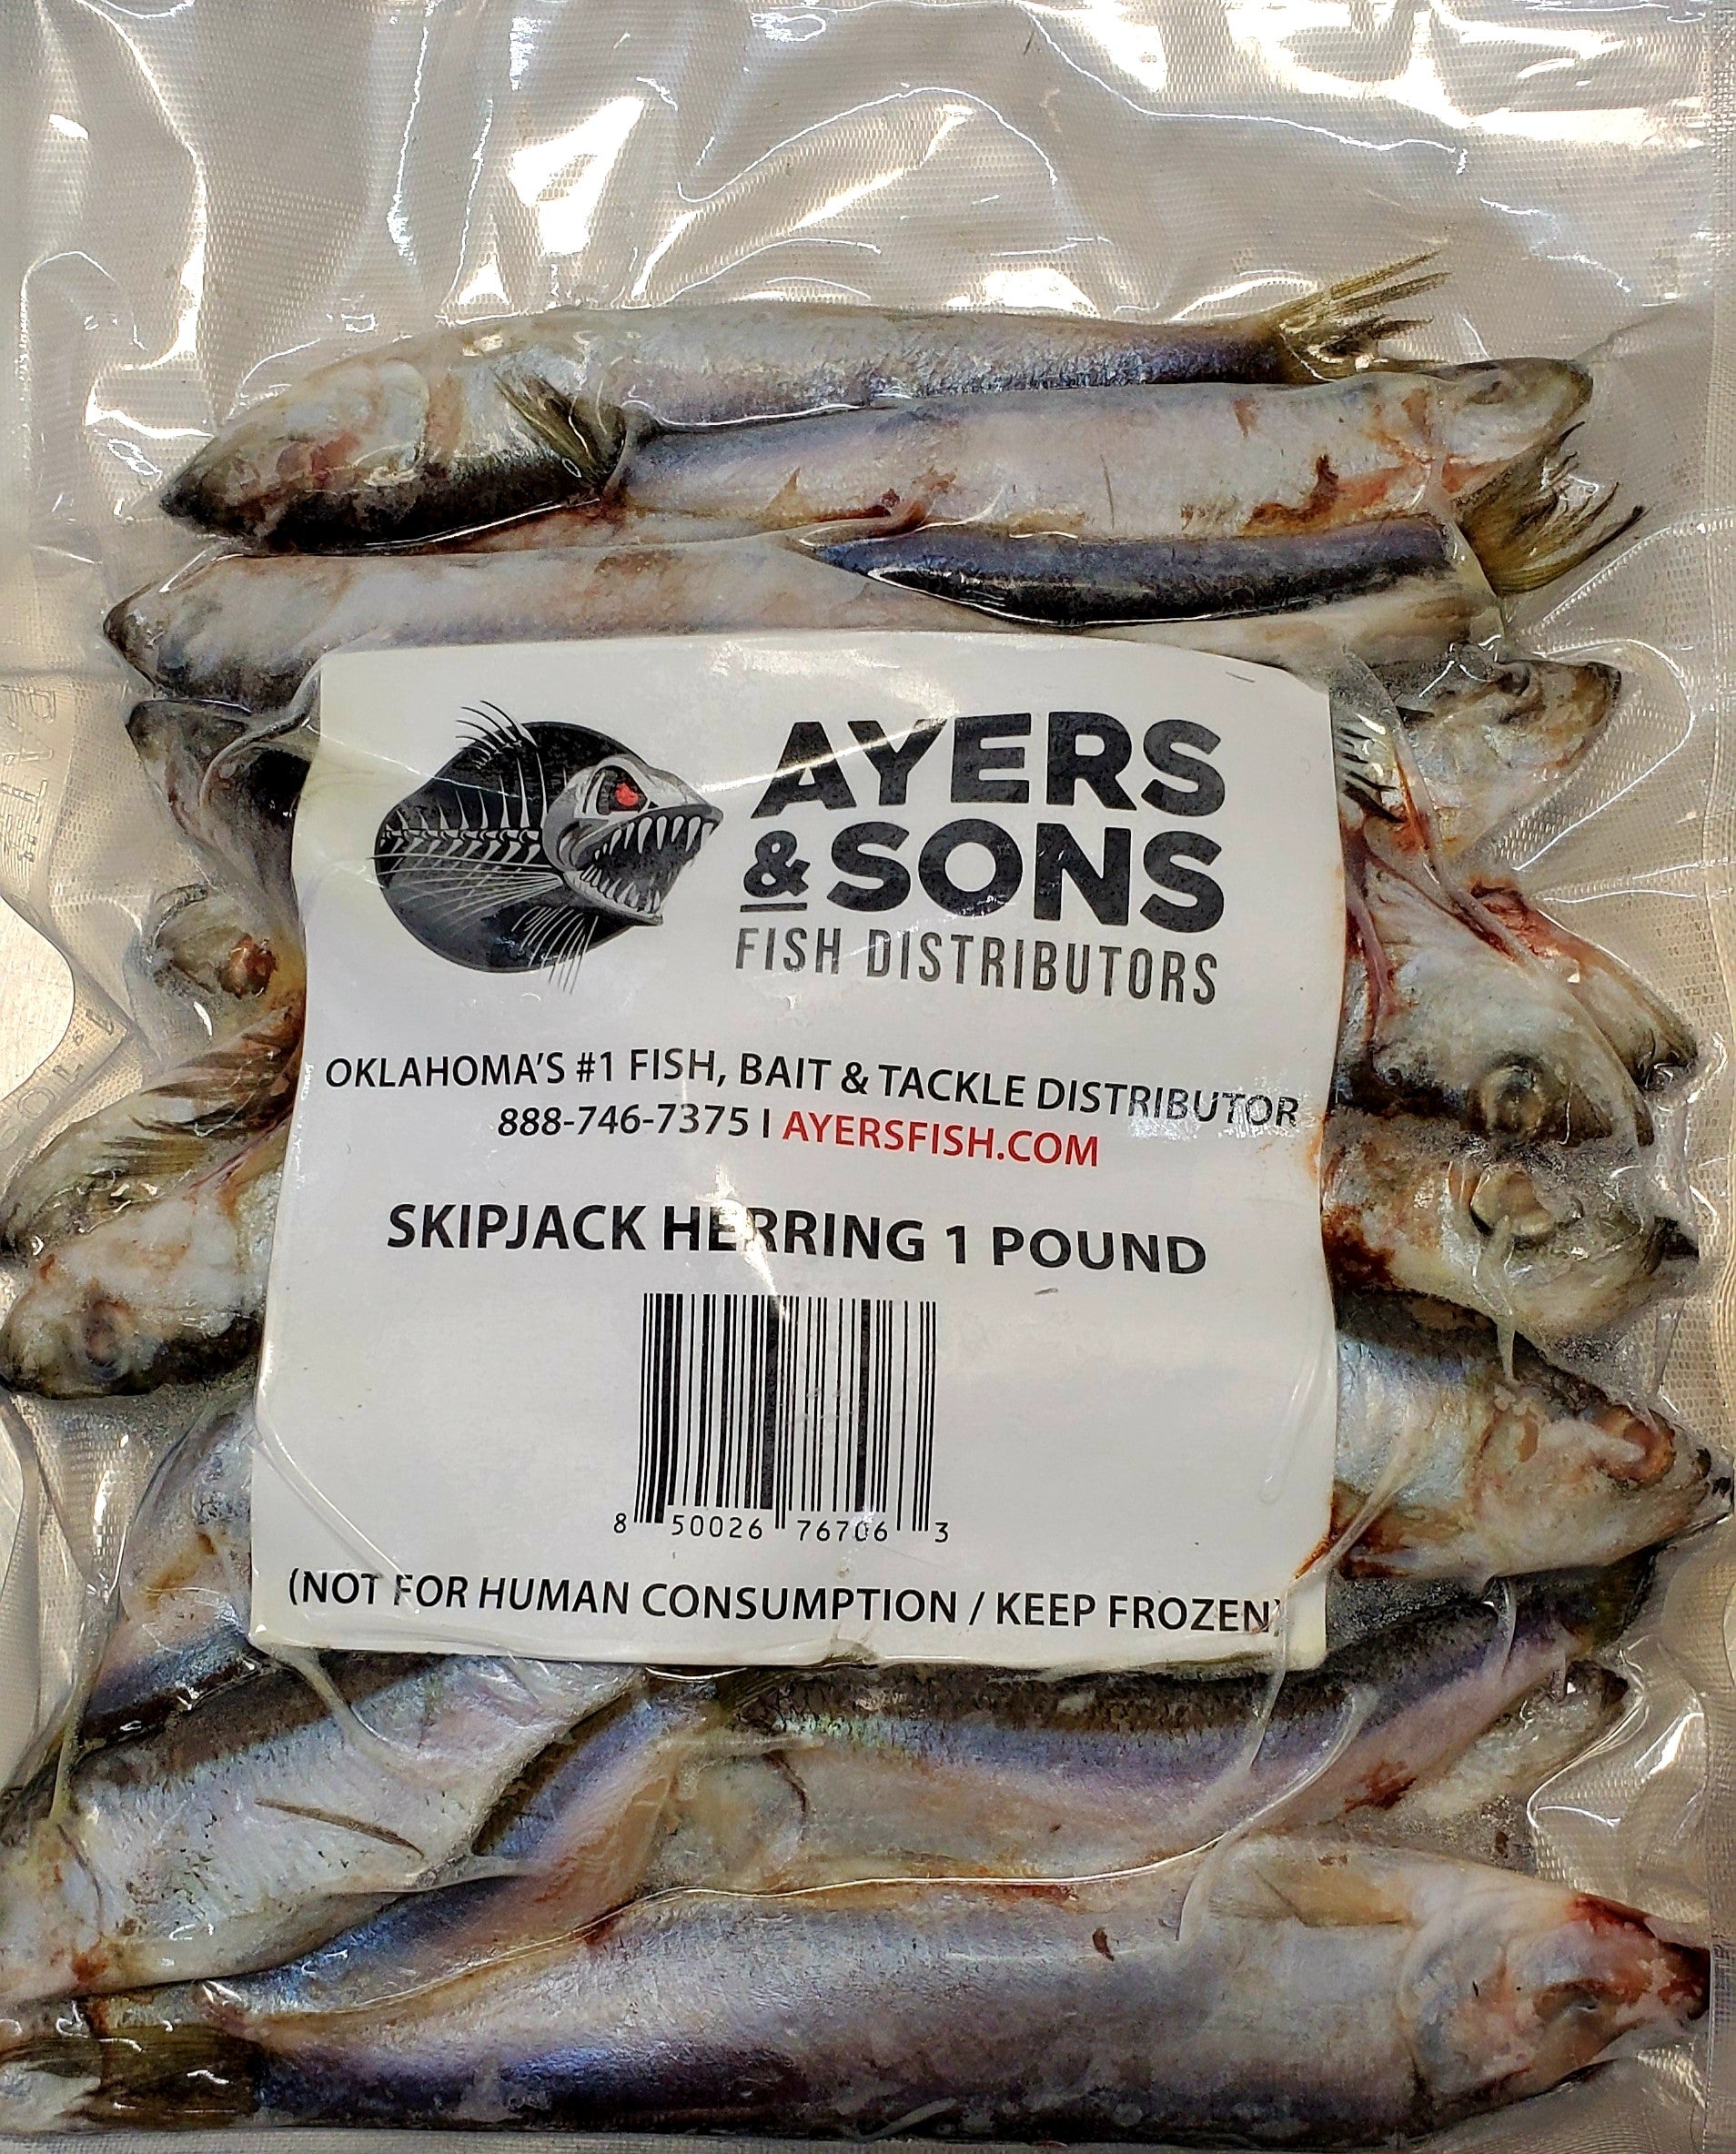 Skipjack Herring 4-6 1 Pound Packages (Case of 10 Packages) +